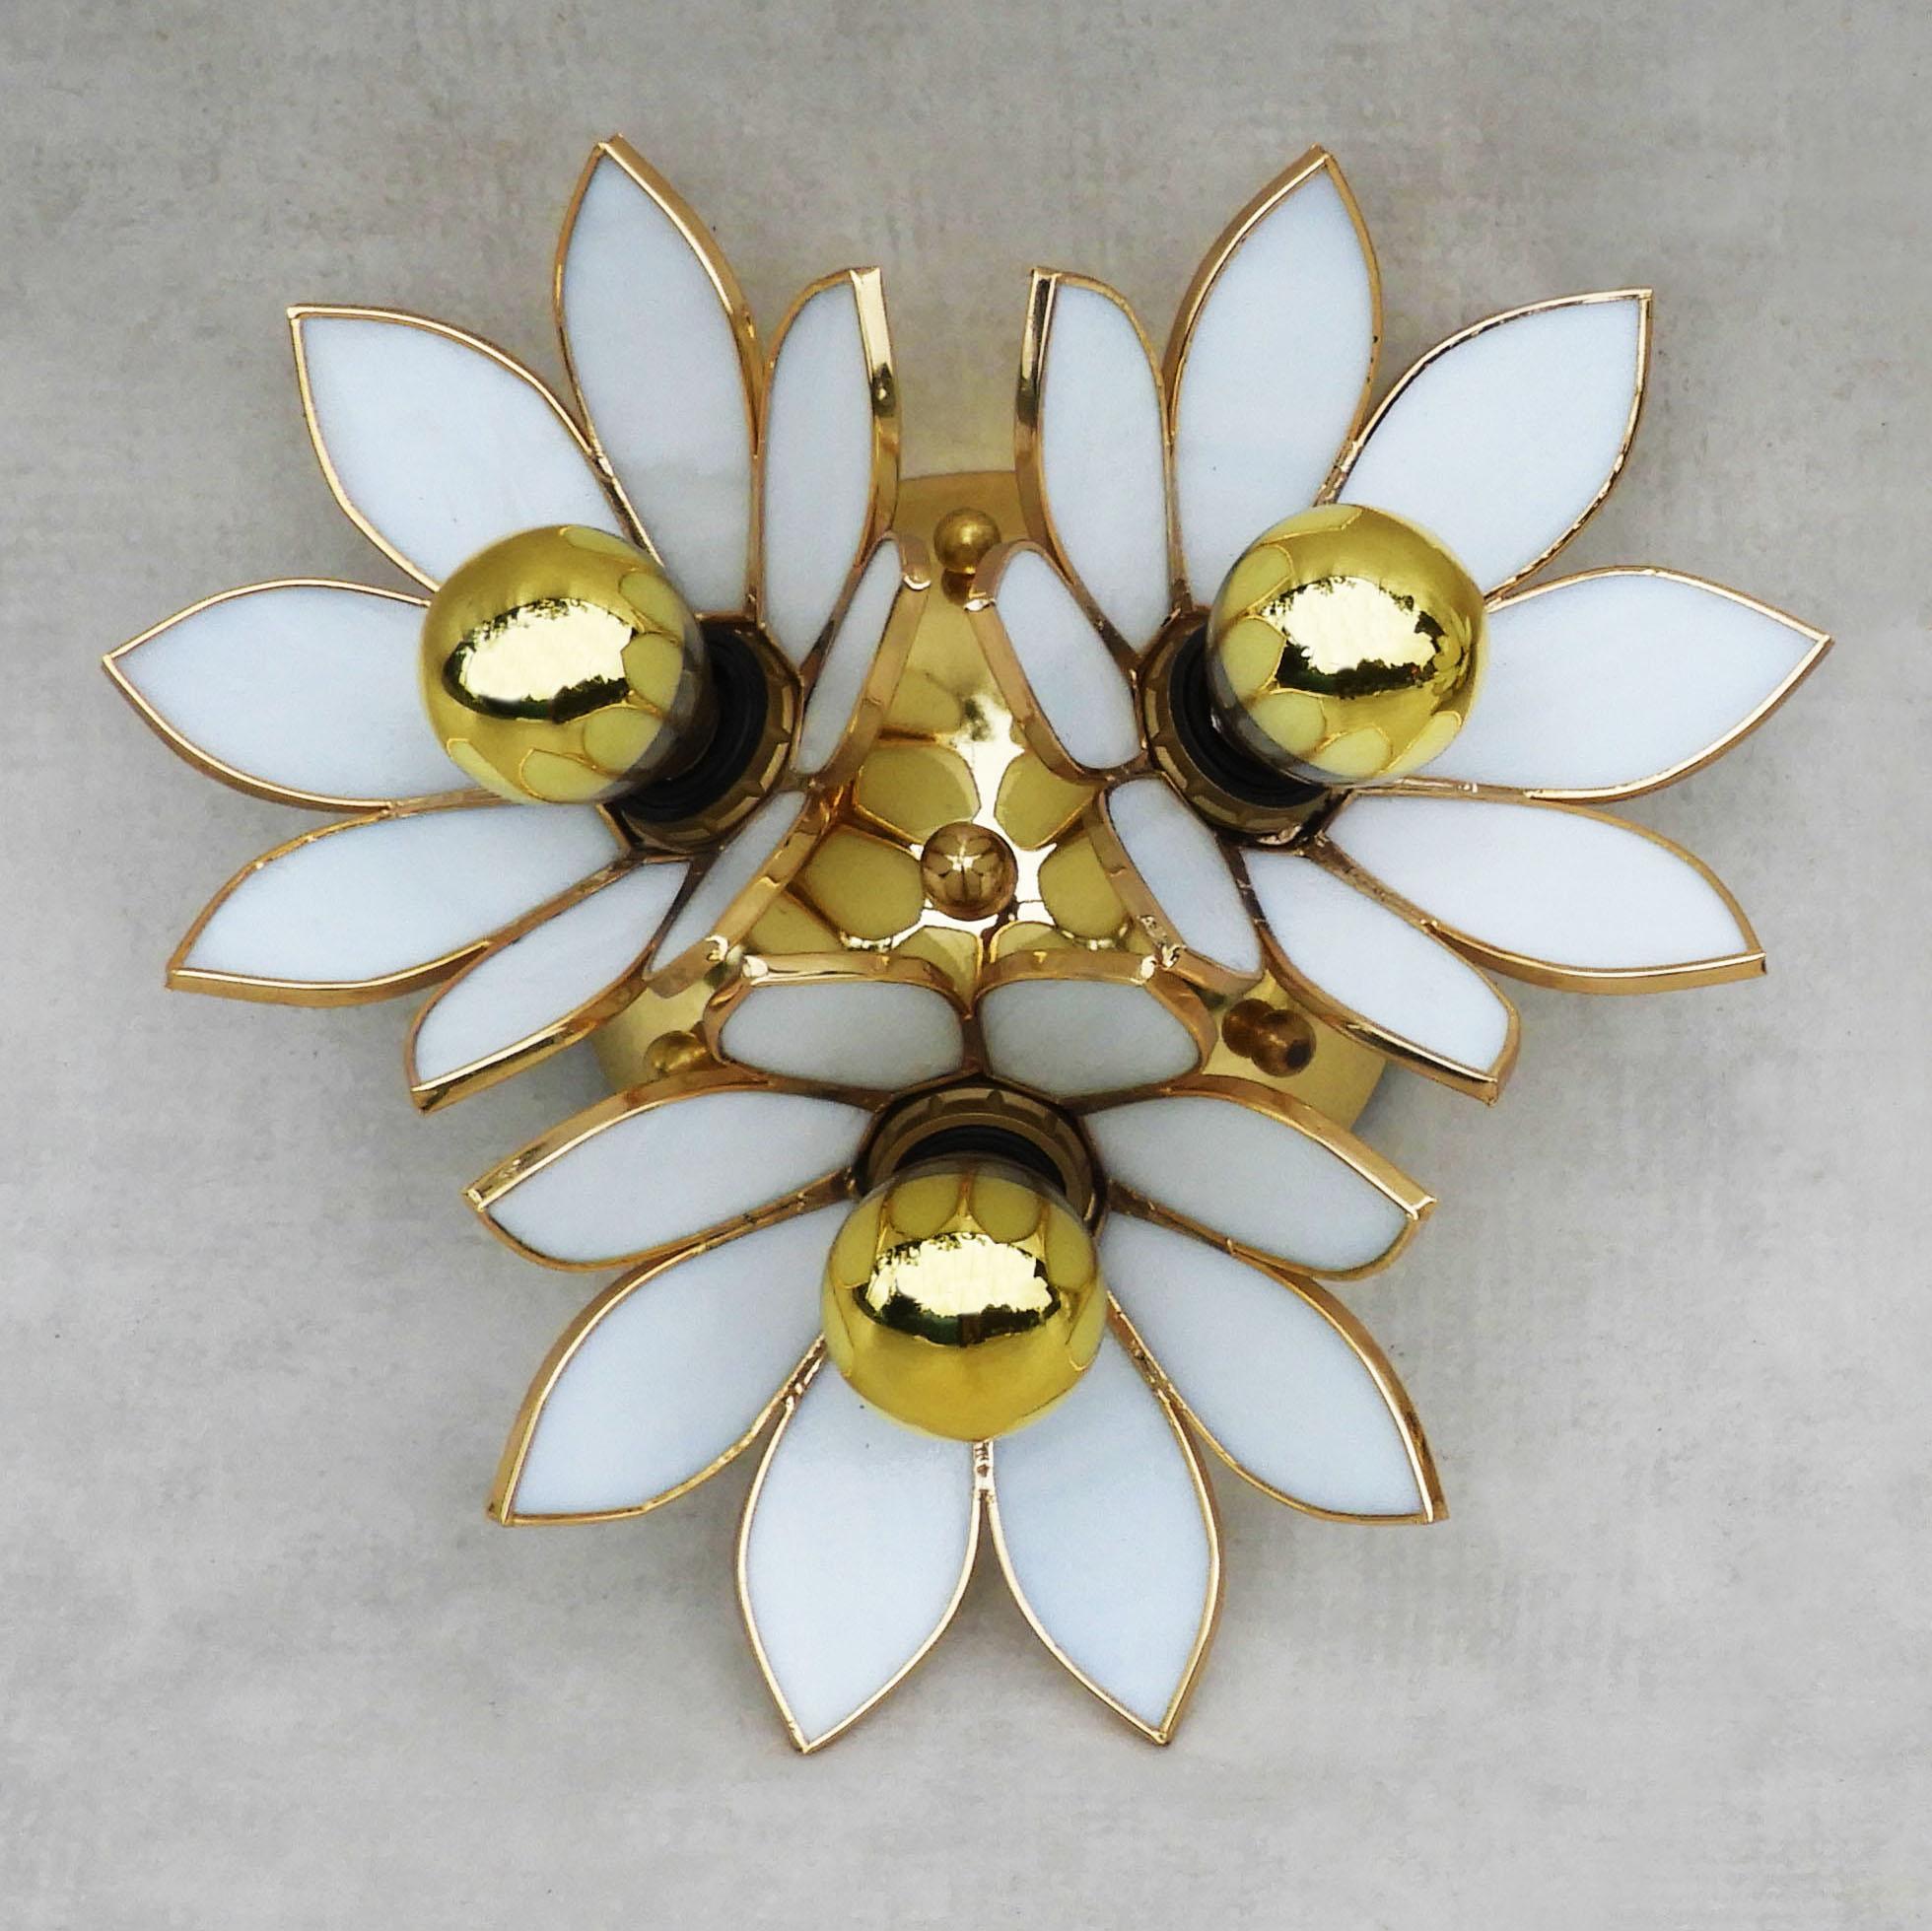 Pair of vintage lotus flower lights c1980 France

A gorgeous pair of vintage lotus flower lights from 1980s France.

Beautiful “Hollywood Regency” style lights in great vintage condition.

Gilt-edged white glass petalled blooms surrounding